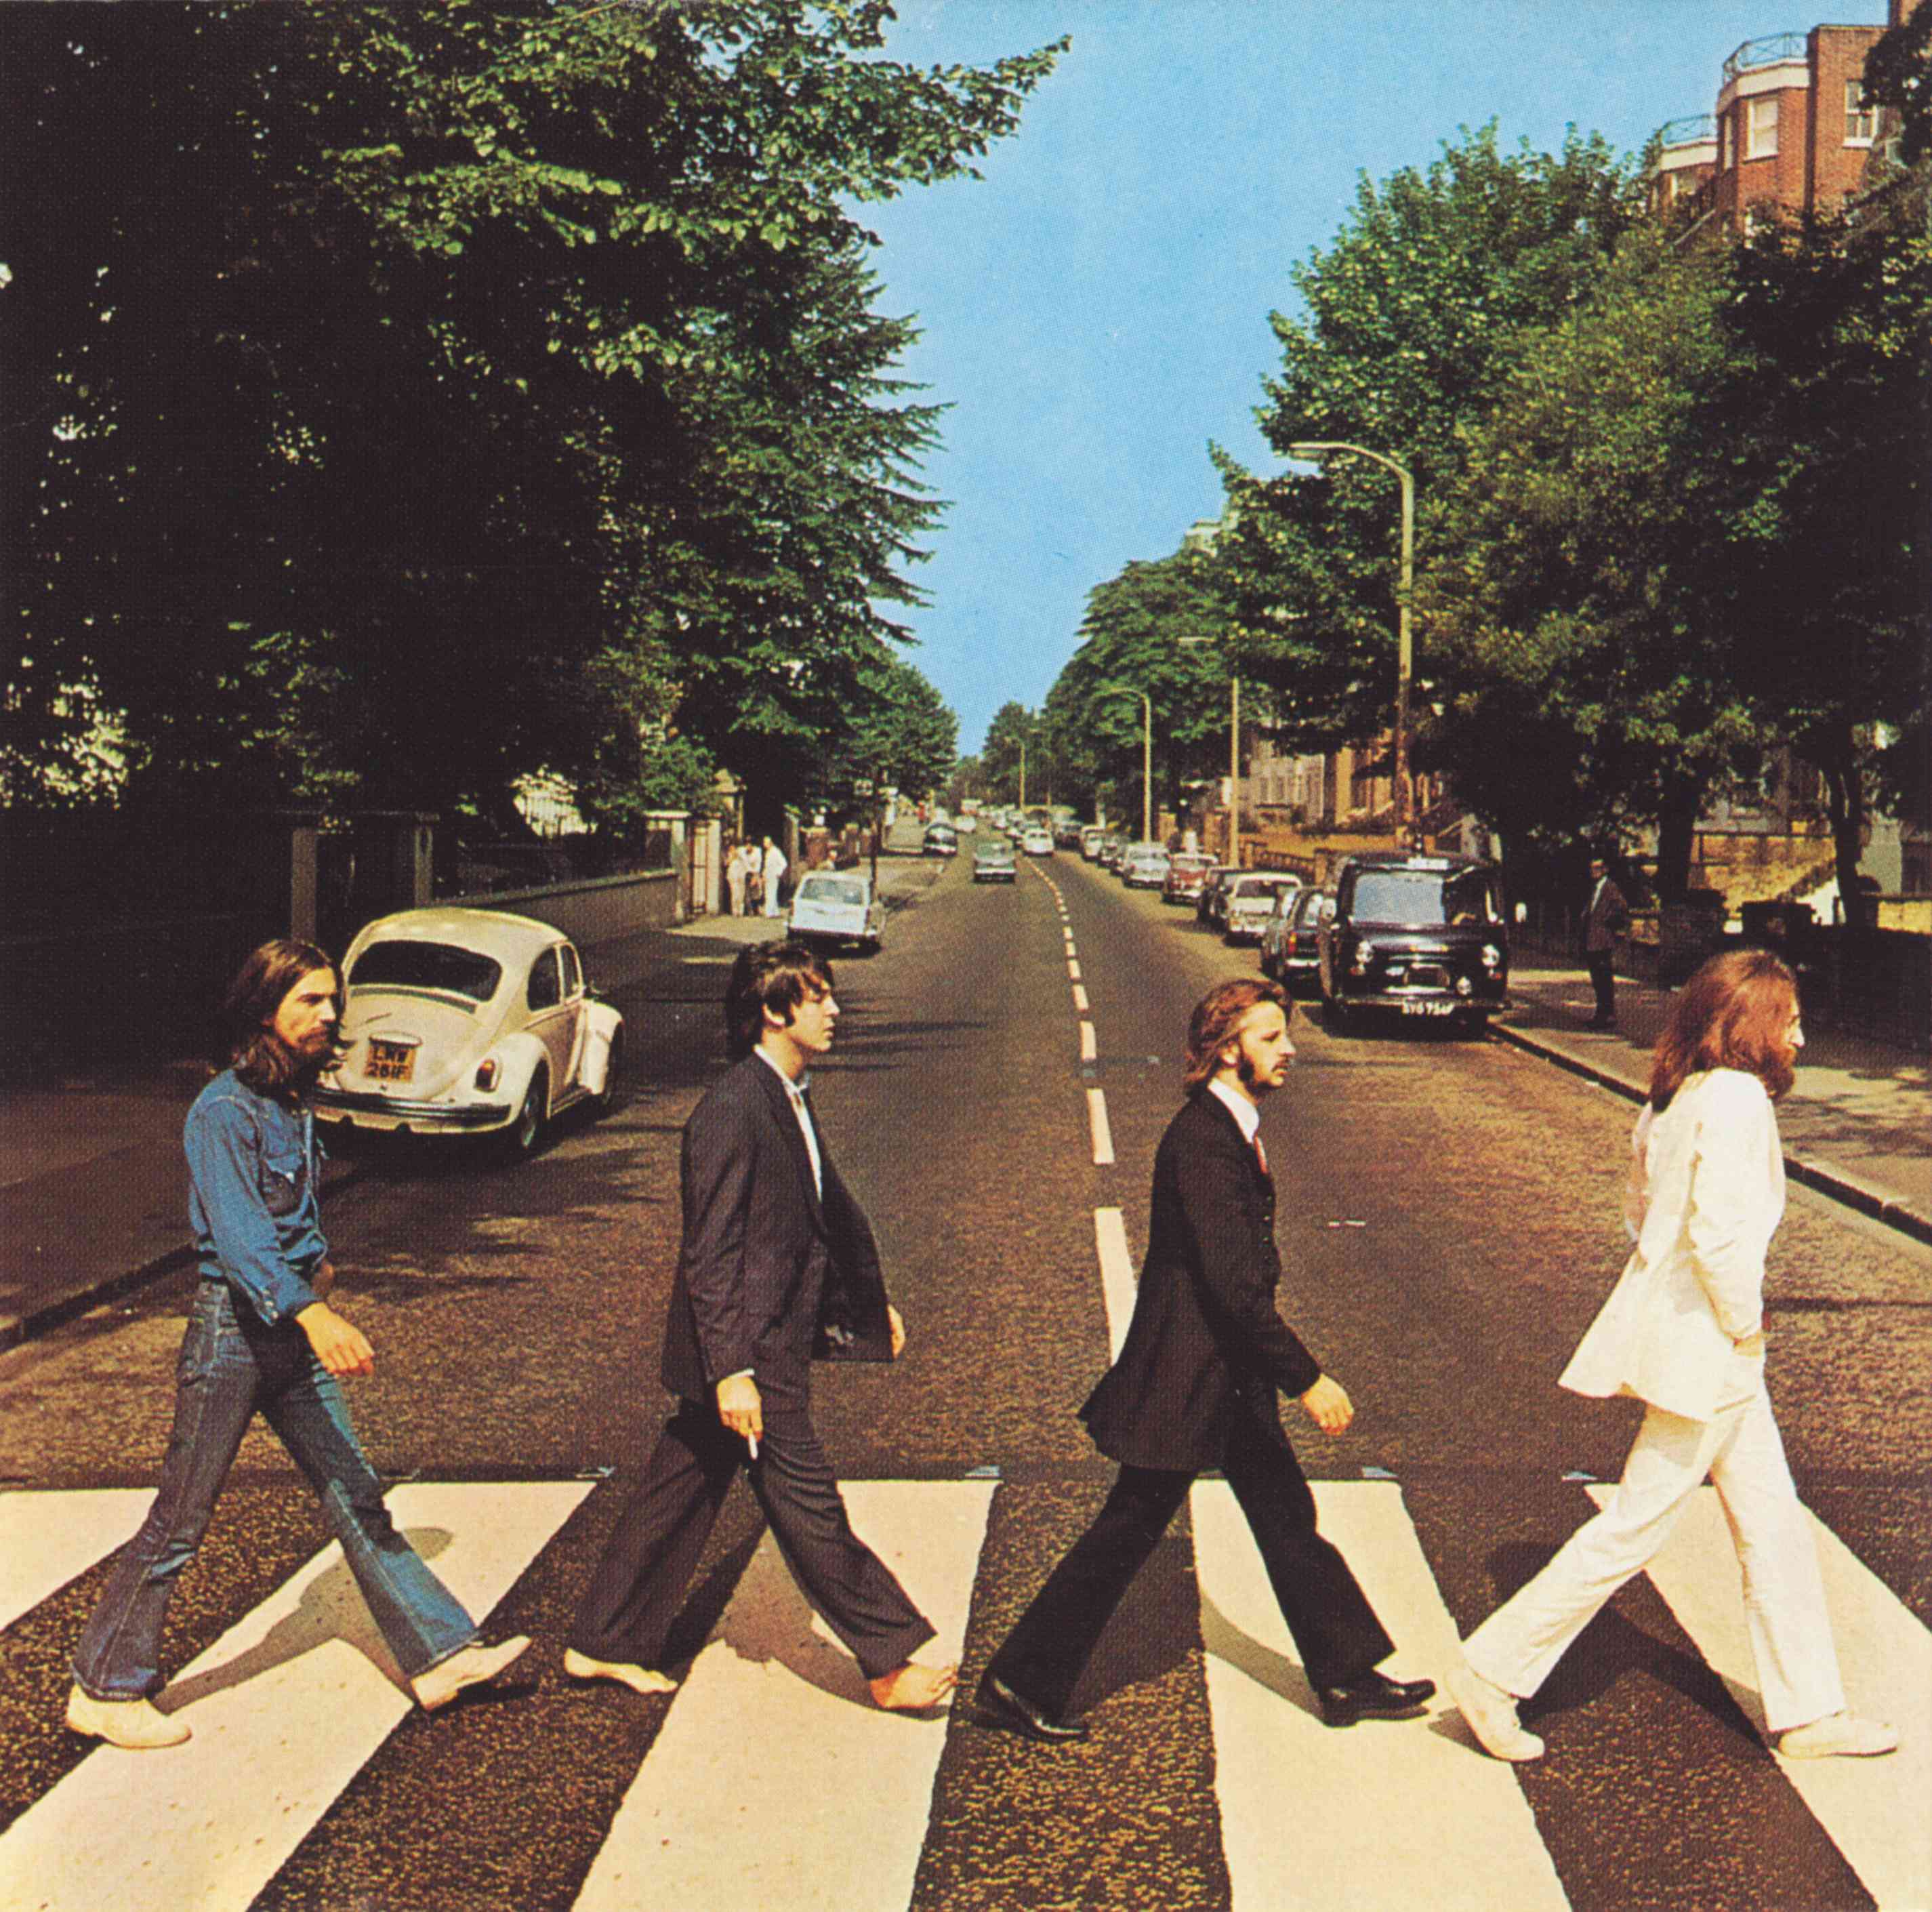 abbey road images